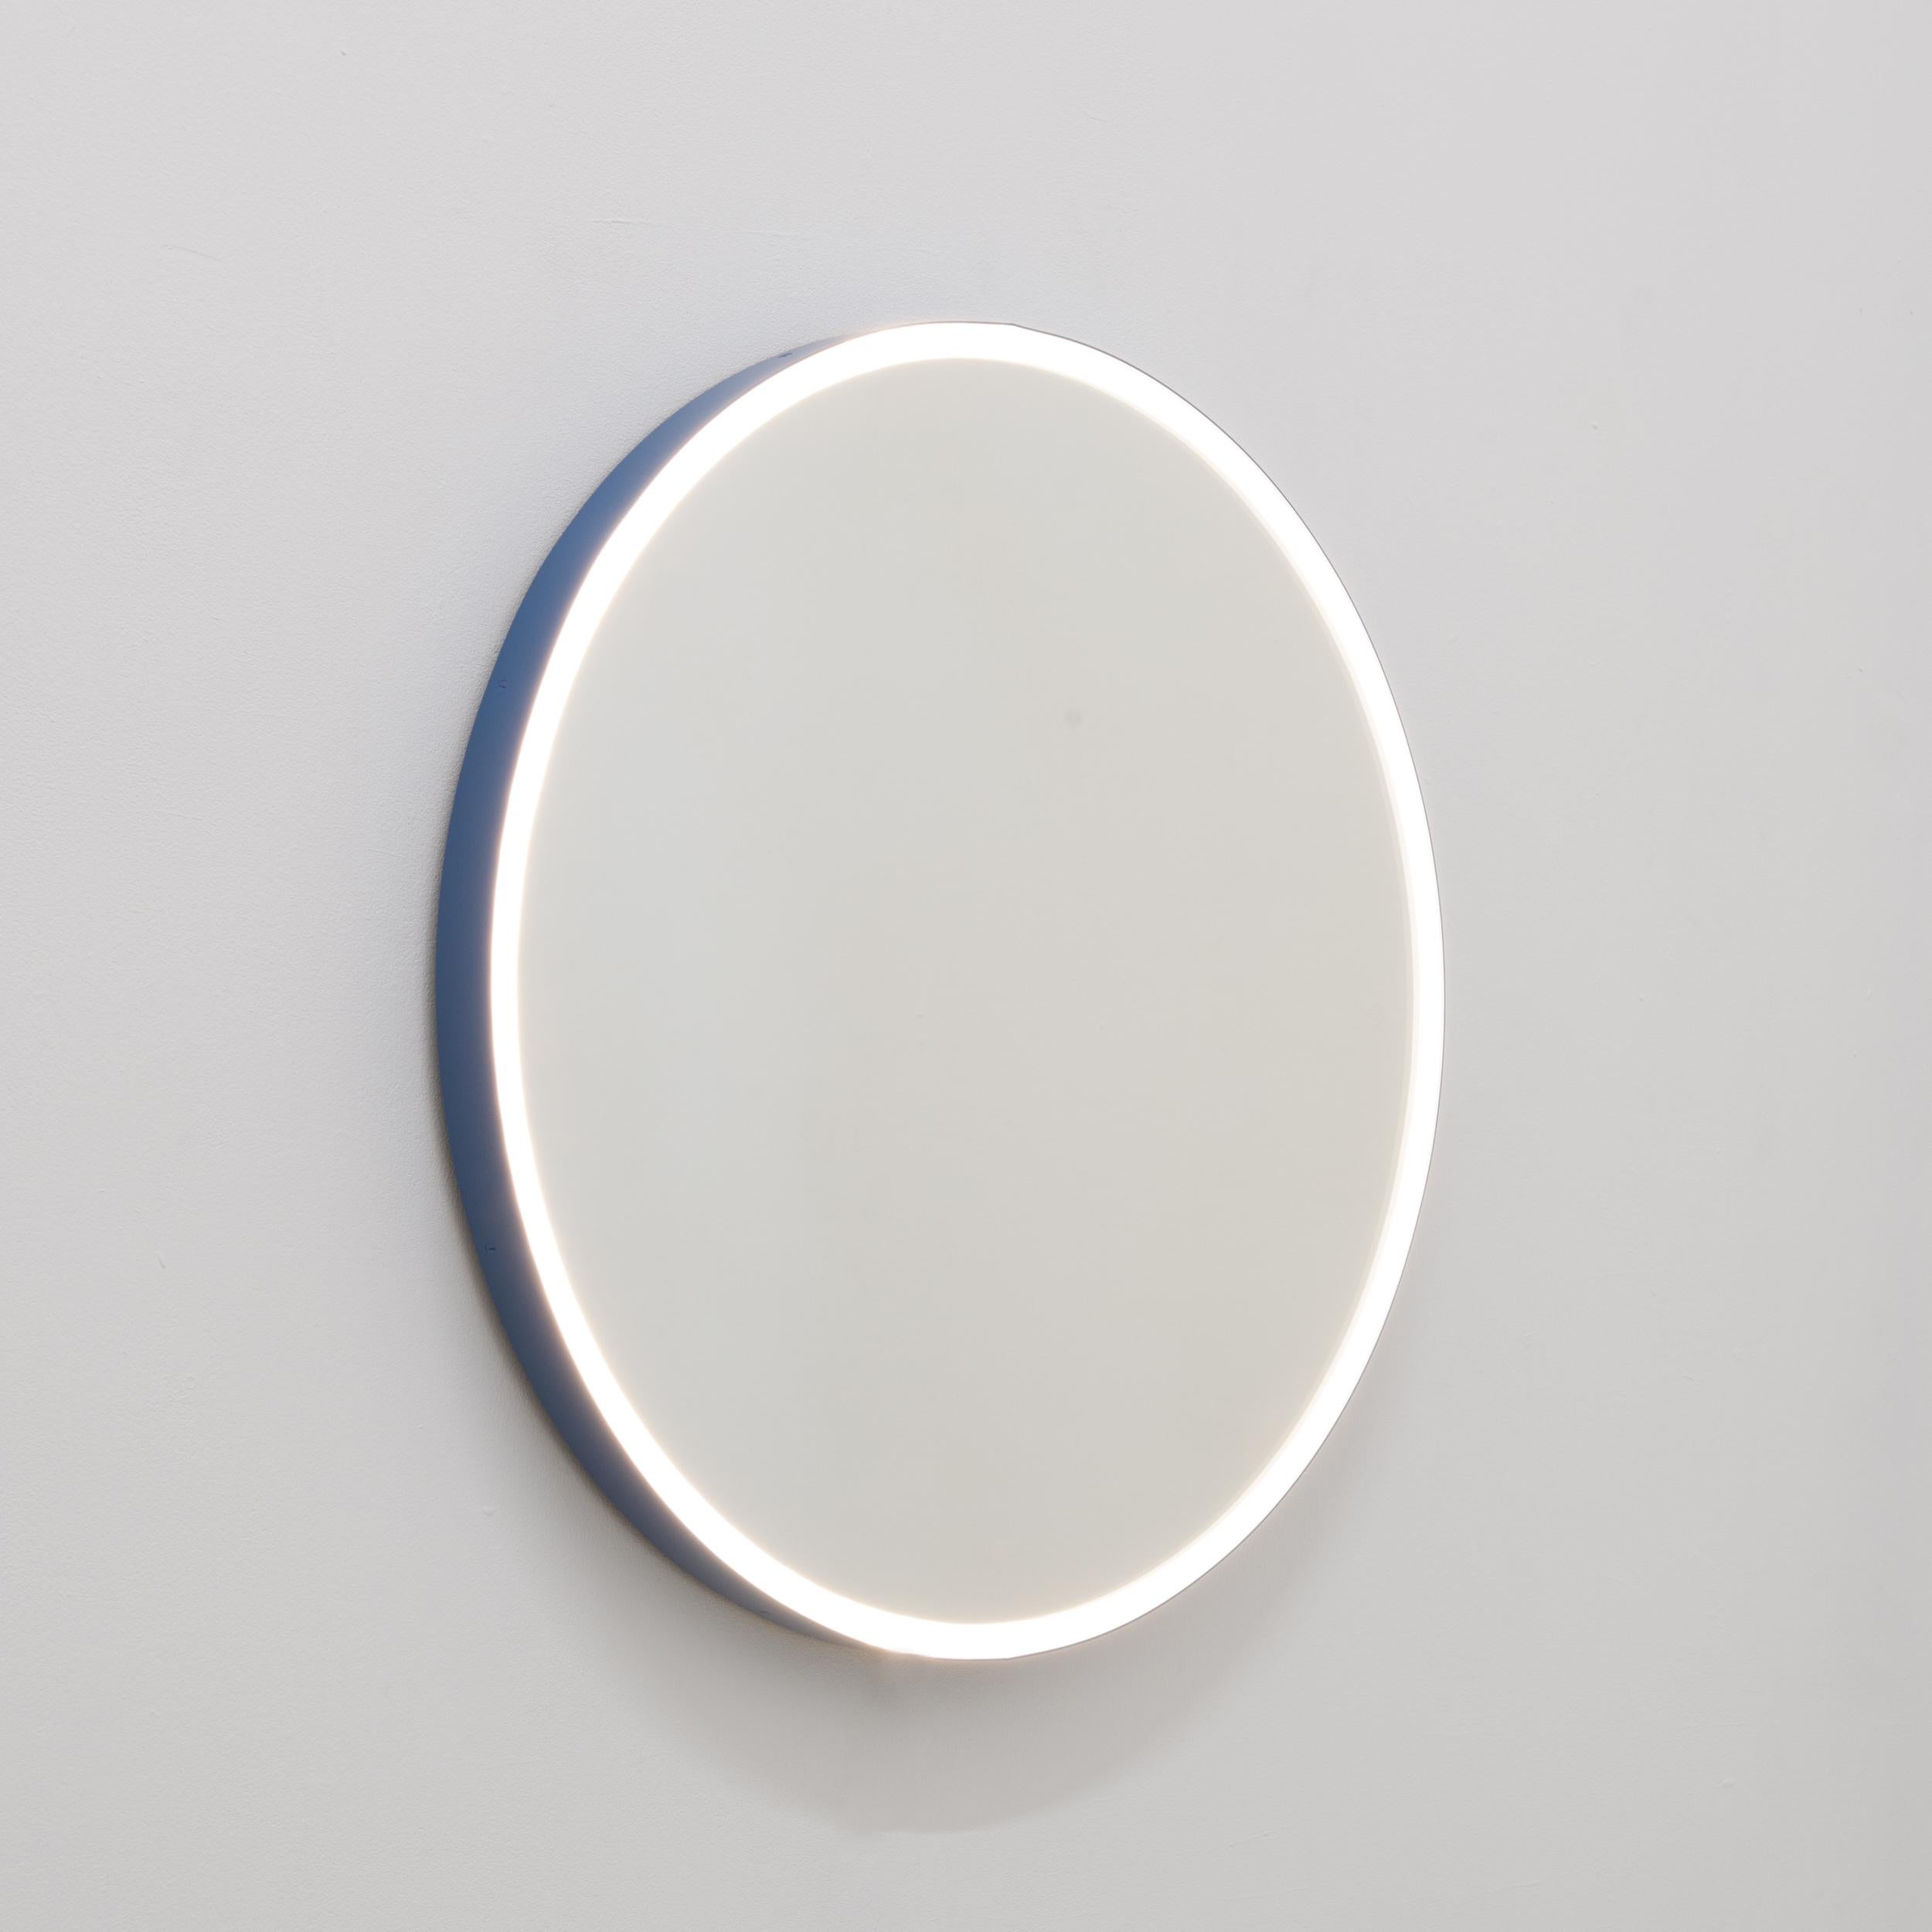 Powder-Coated Orbis Front Illuminated Circular Modern Contemporary Mirror with Blue Frame, XL For Sale